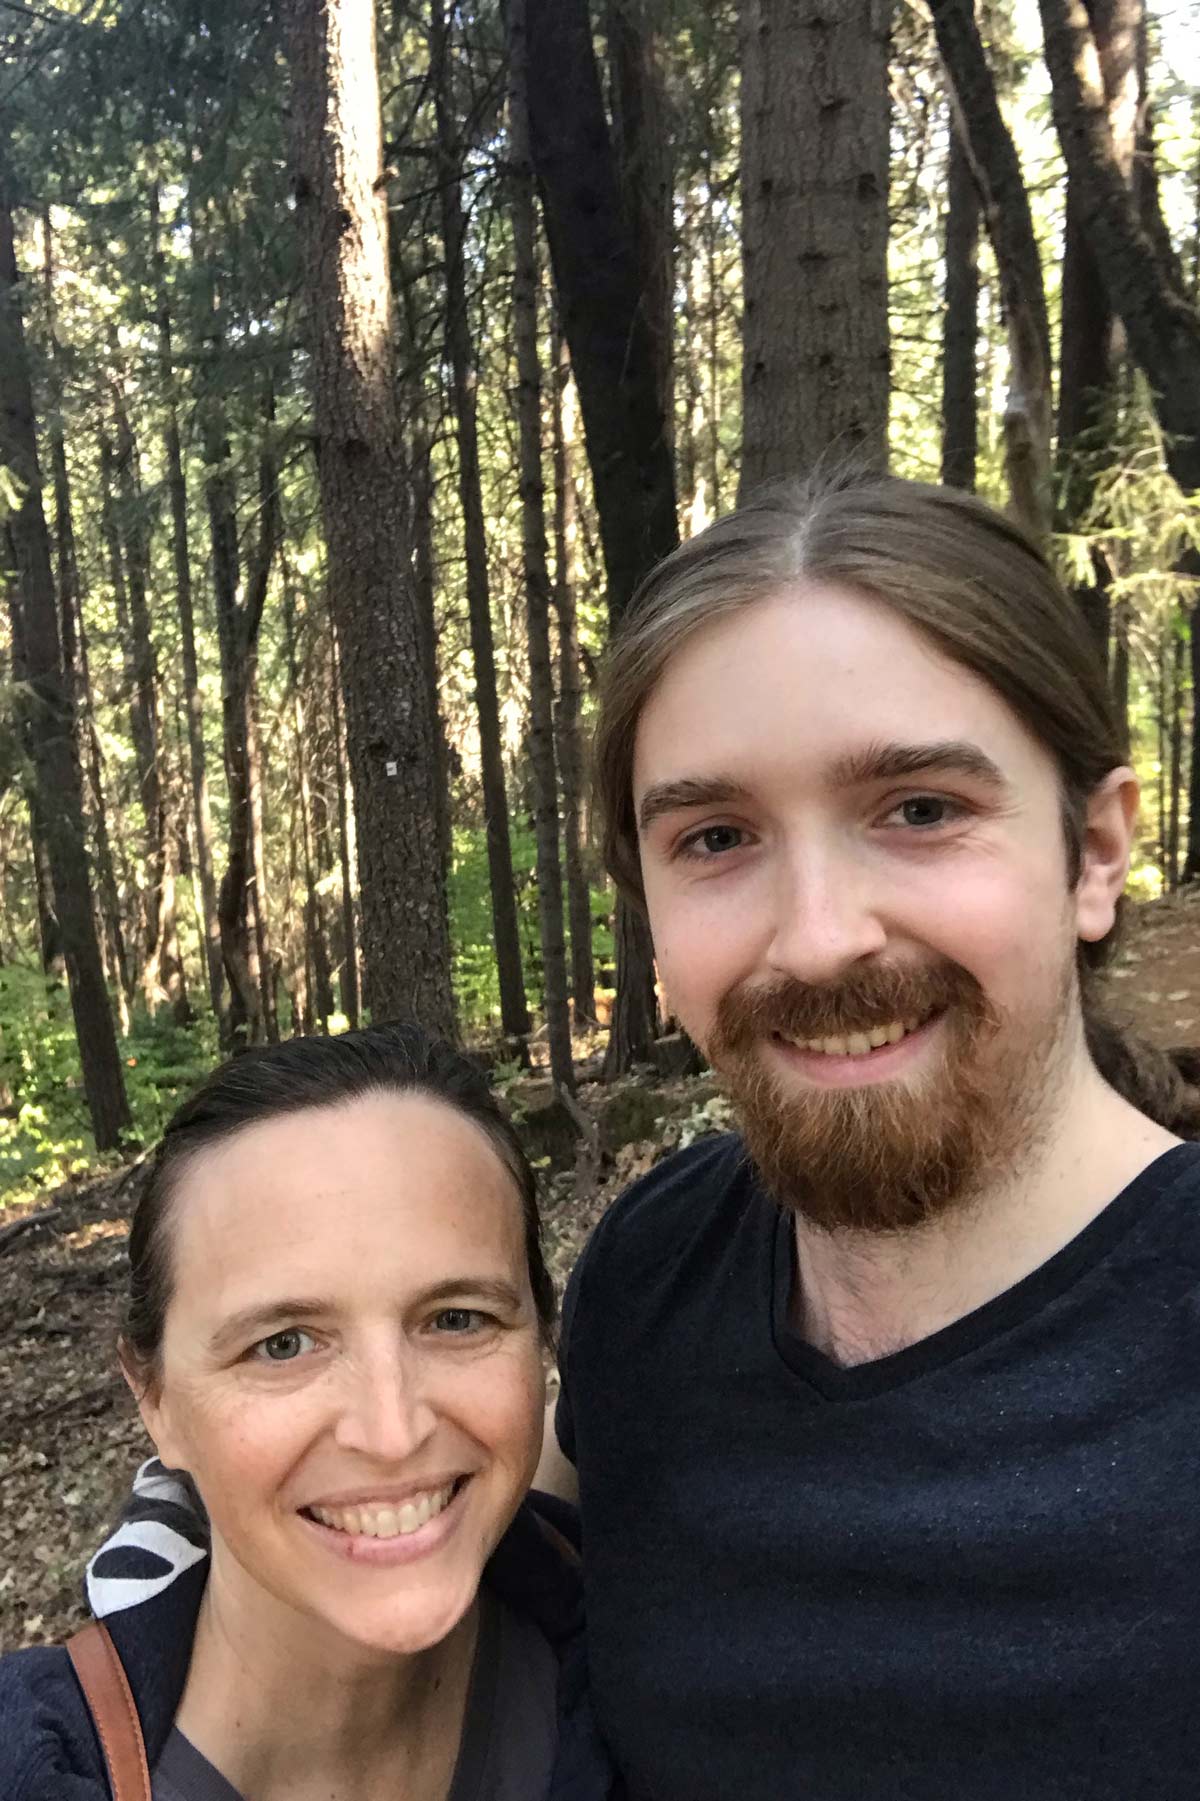 mom and grown son in the forest.